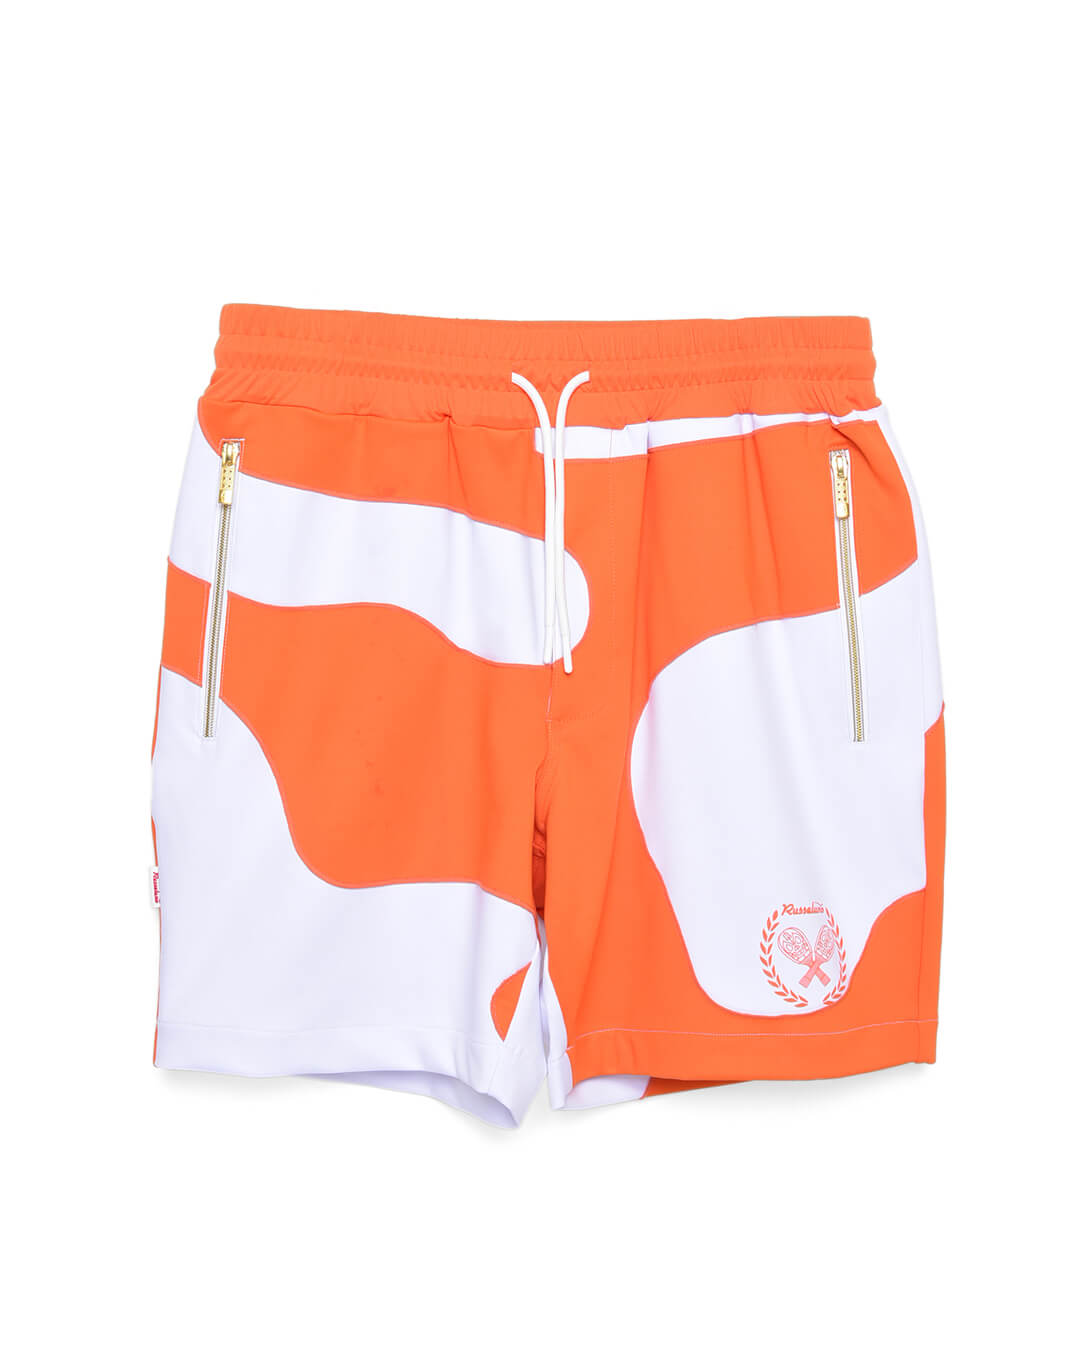 PATCH WORK CAMO SHORTS